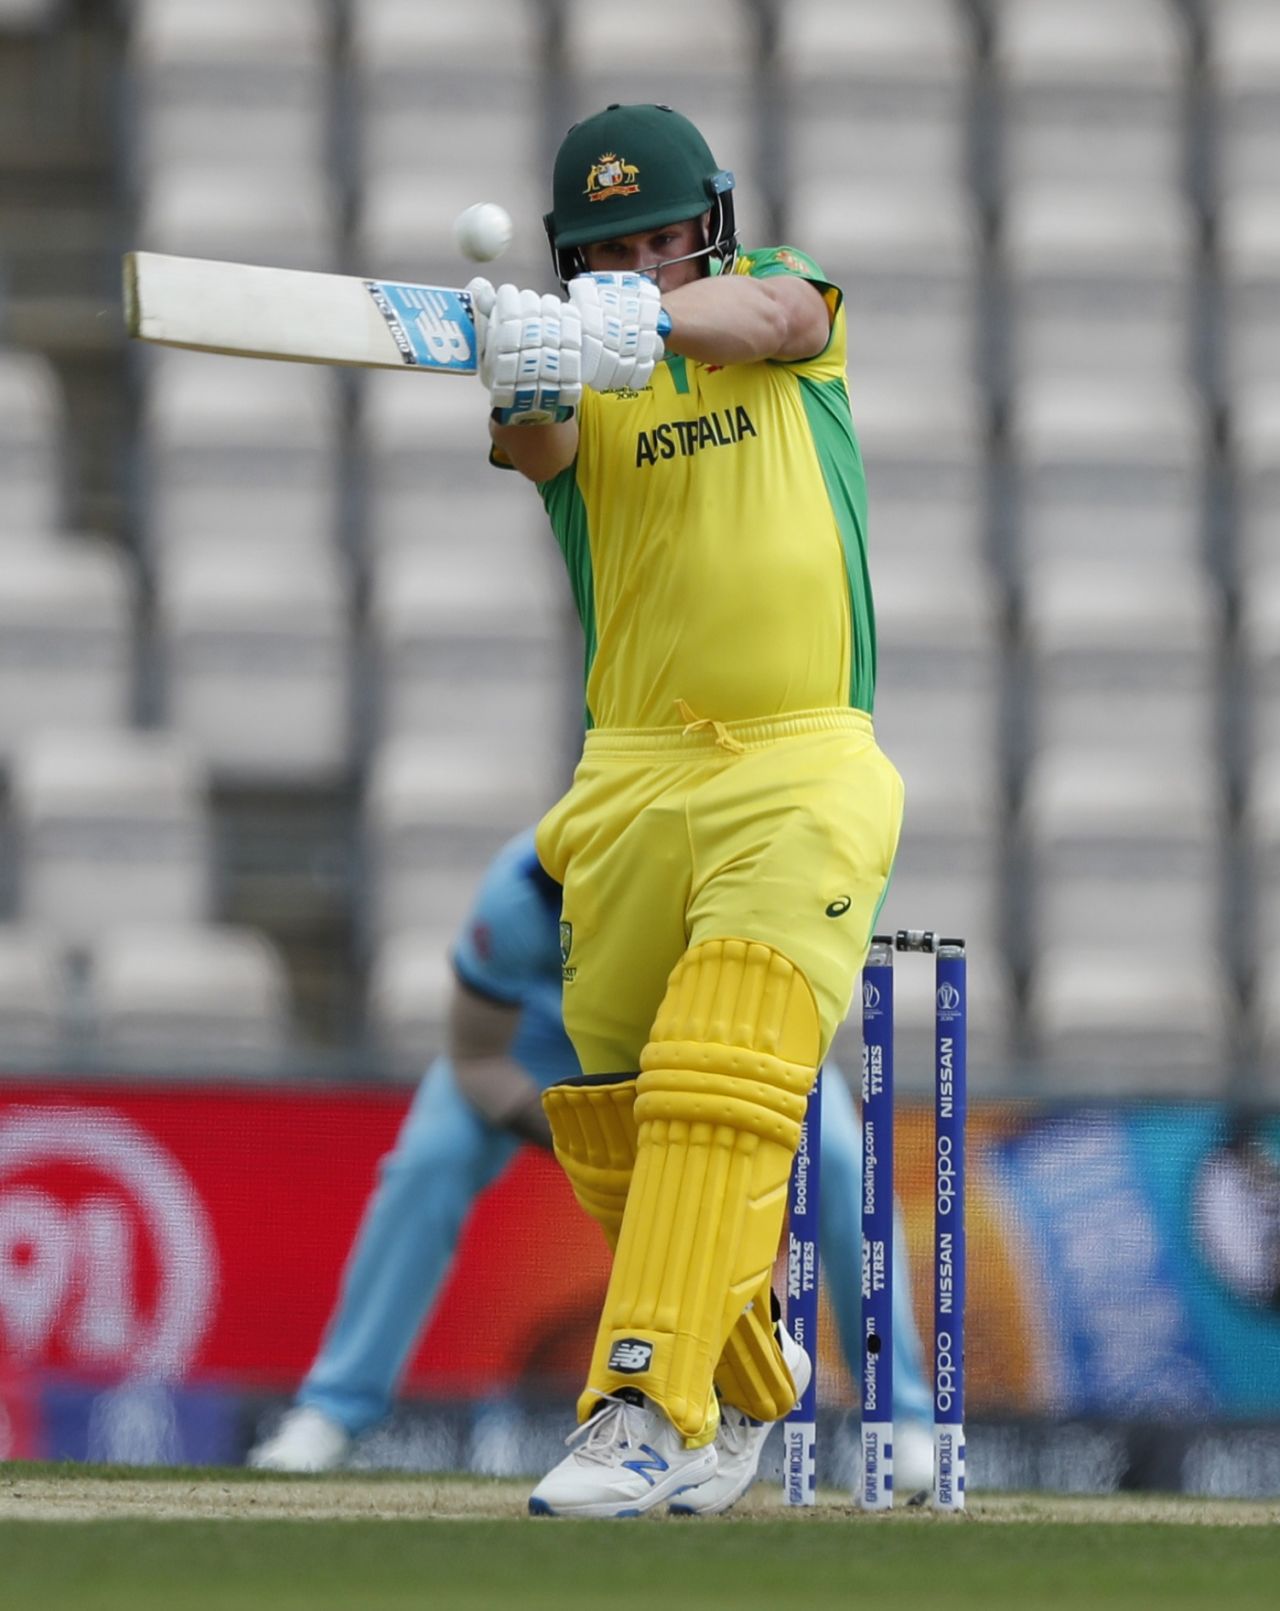 Aaron Finch shapes up to pull, England v Australia, World Cup 2019 warm-up, Southampton, May 25, 2019